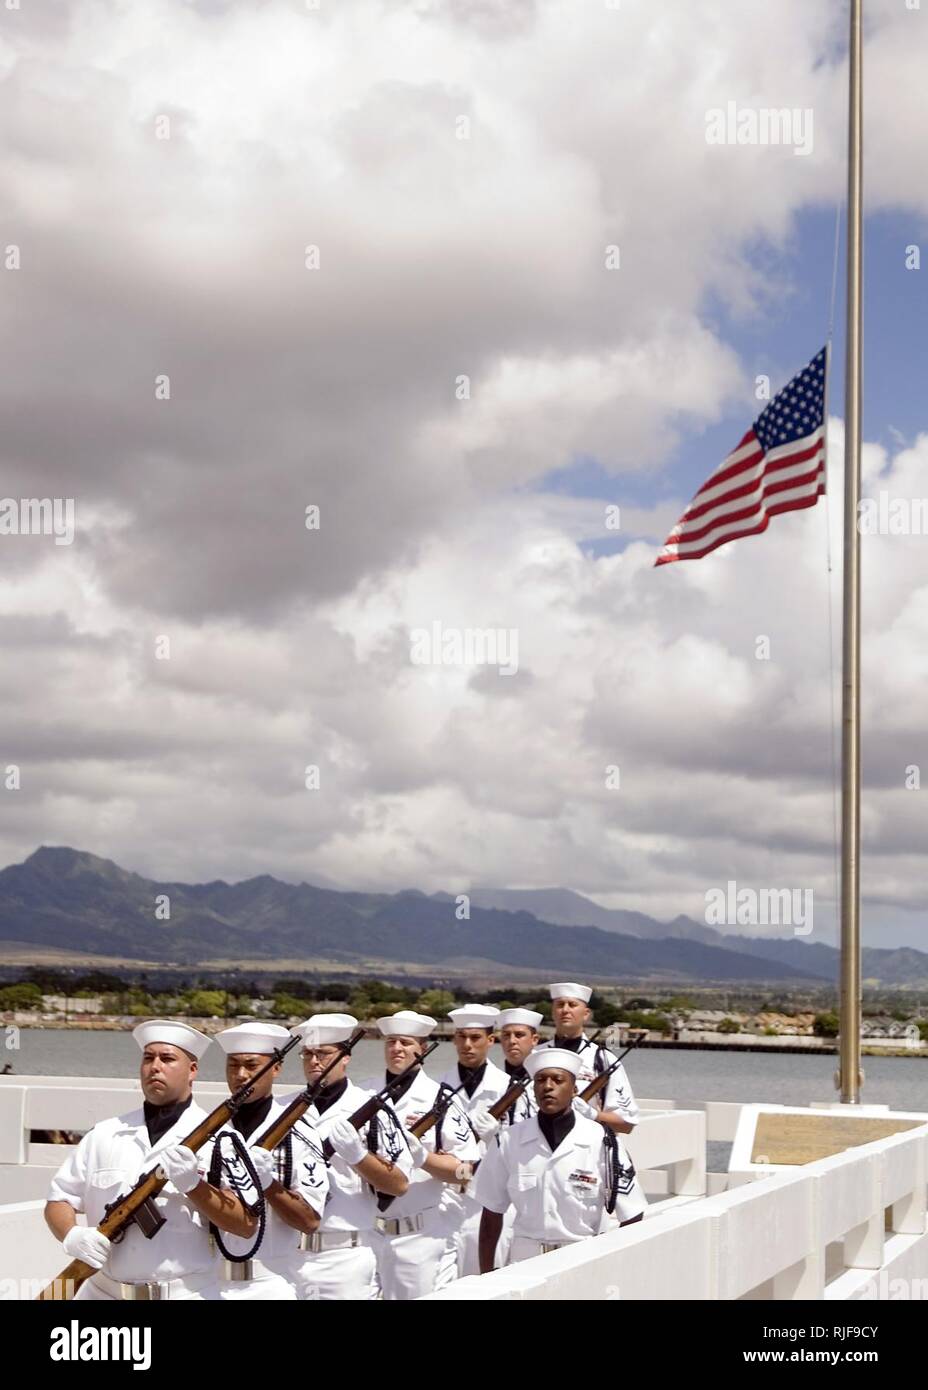 Members of the Navy ceremonial guards post after an interment ceremony at the USS Utah Memorial on Ford Island at Naval Station Pearl Harbor. The ceremony was held to honor Petty Officer First Class Jimmy Oberto, a crewmember of the Florida-class dreadnaught battleship USS Utah during the Pearl Harbor attack. Stock Photo